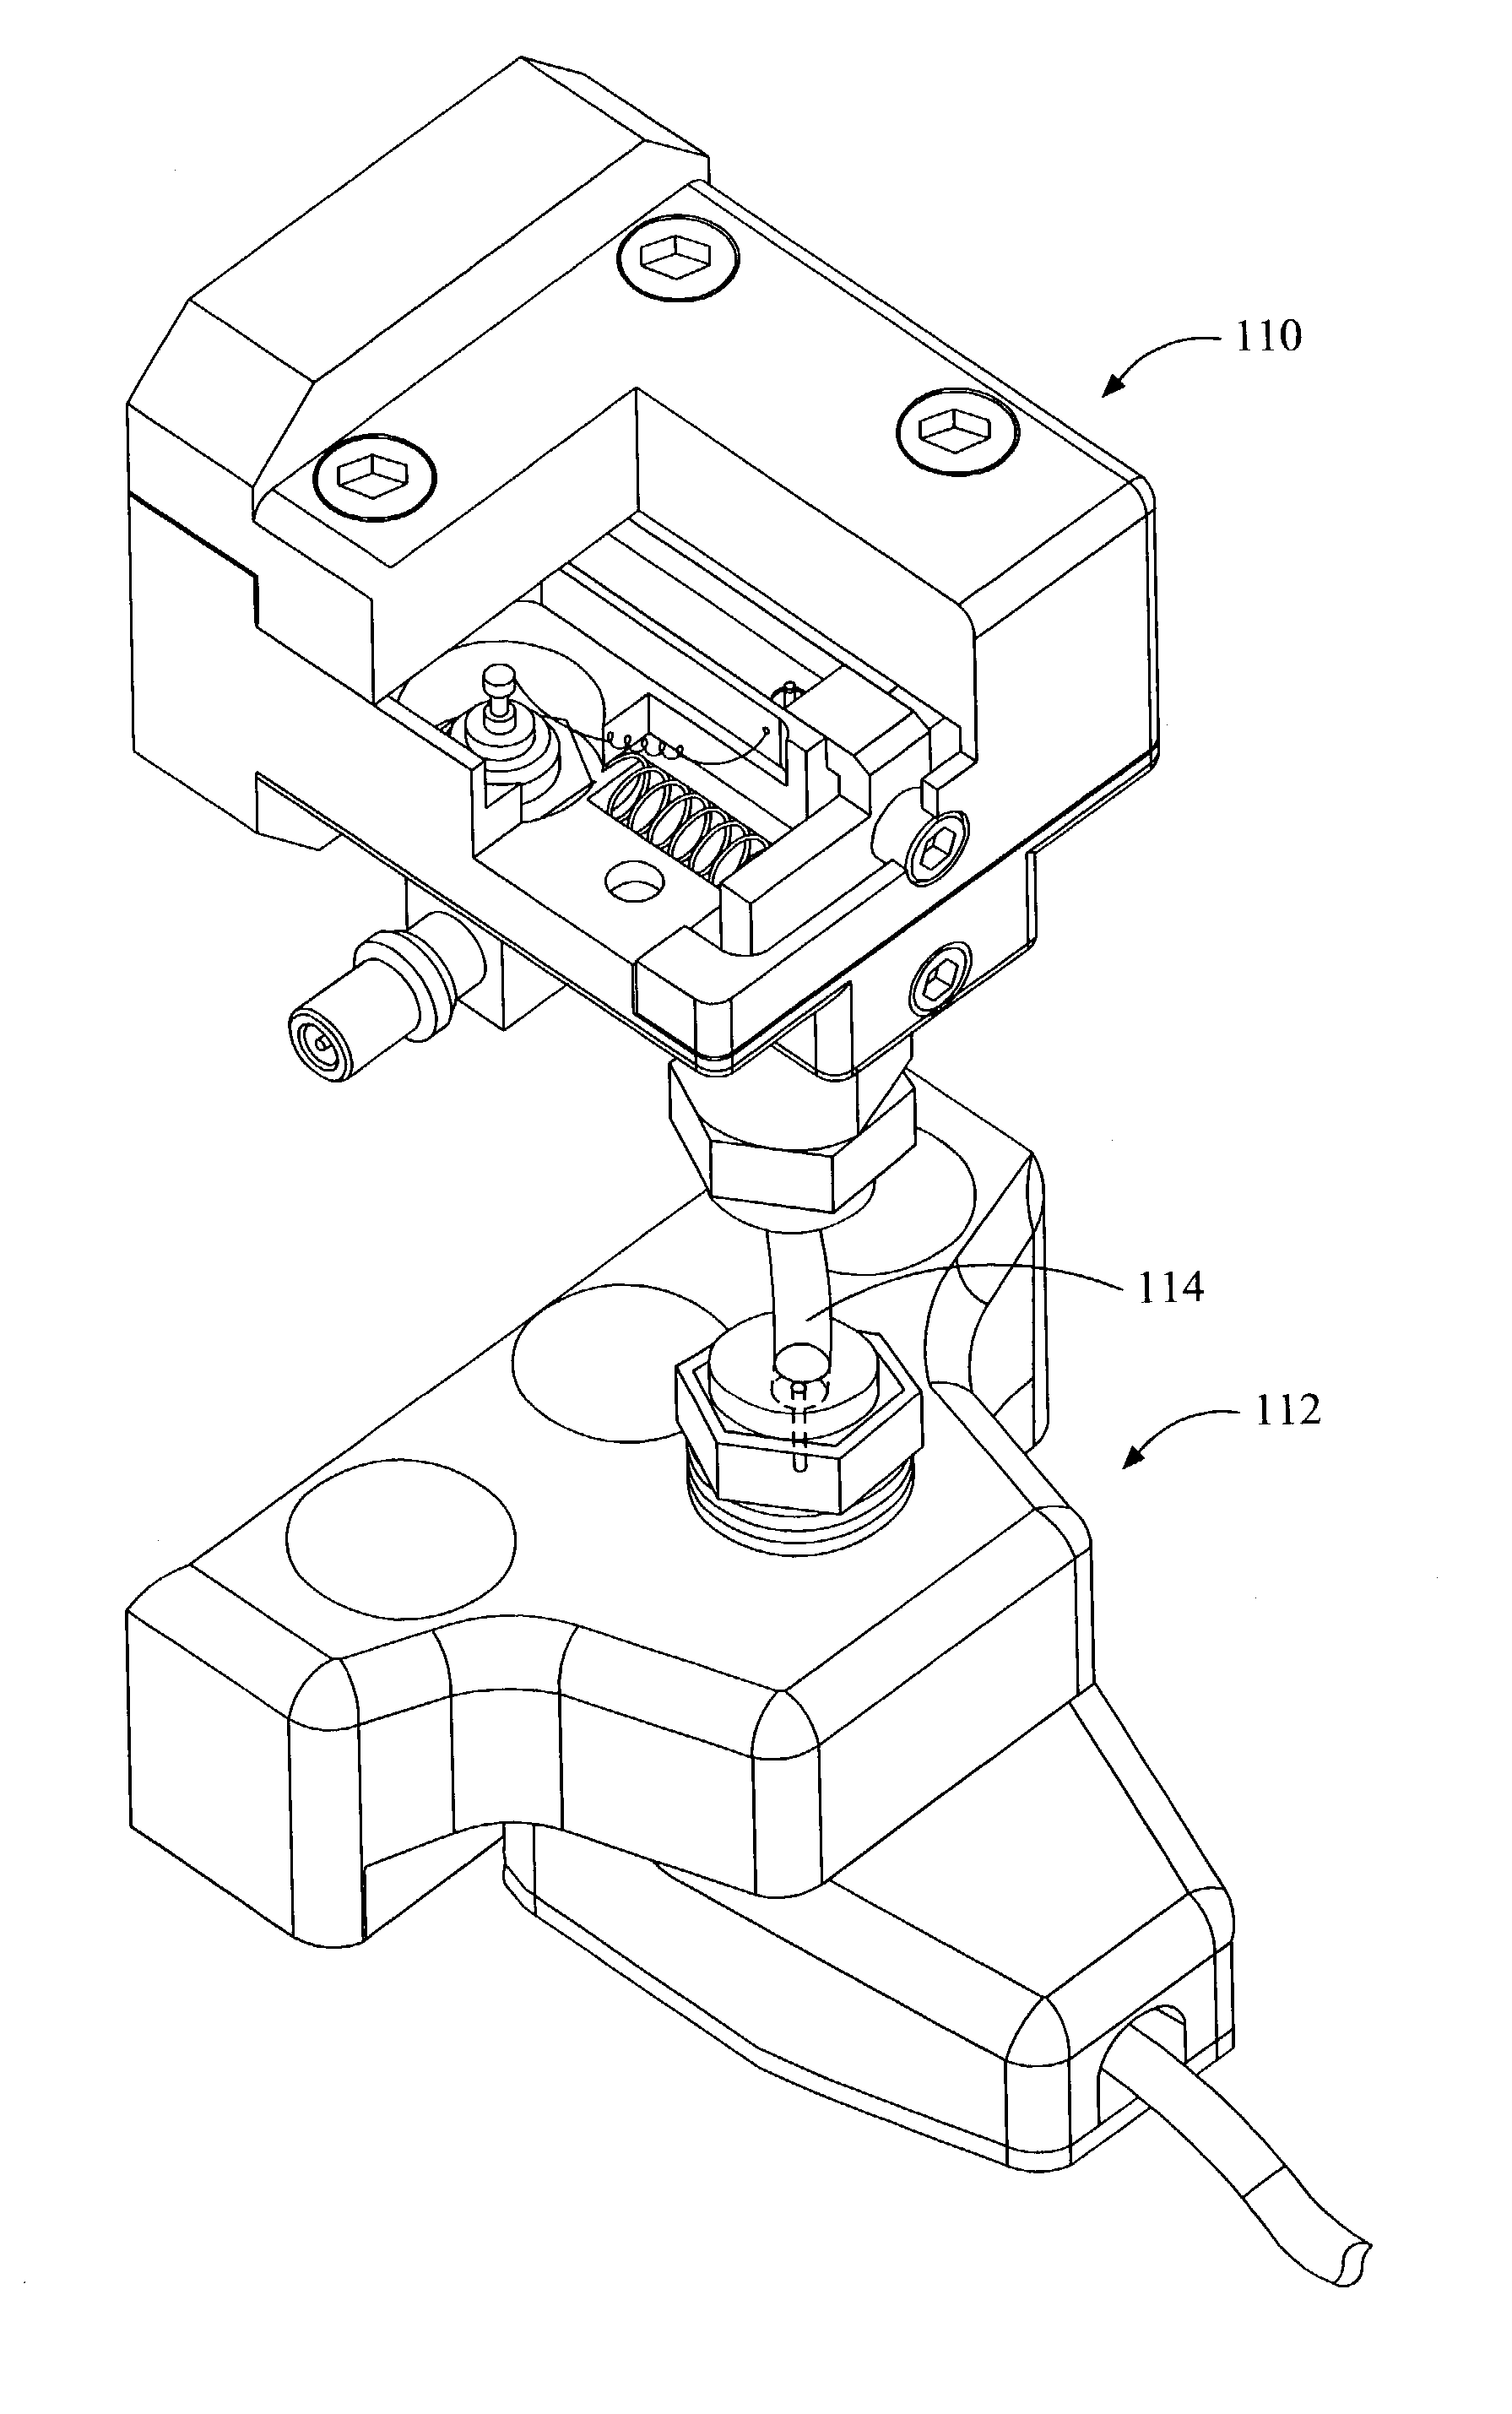 Waveguide adapter for probe assembly having a detachable bias tee